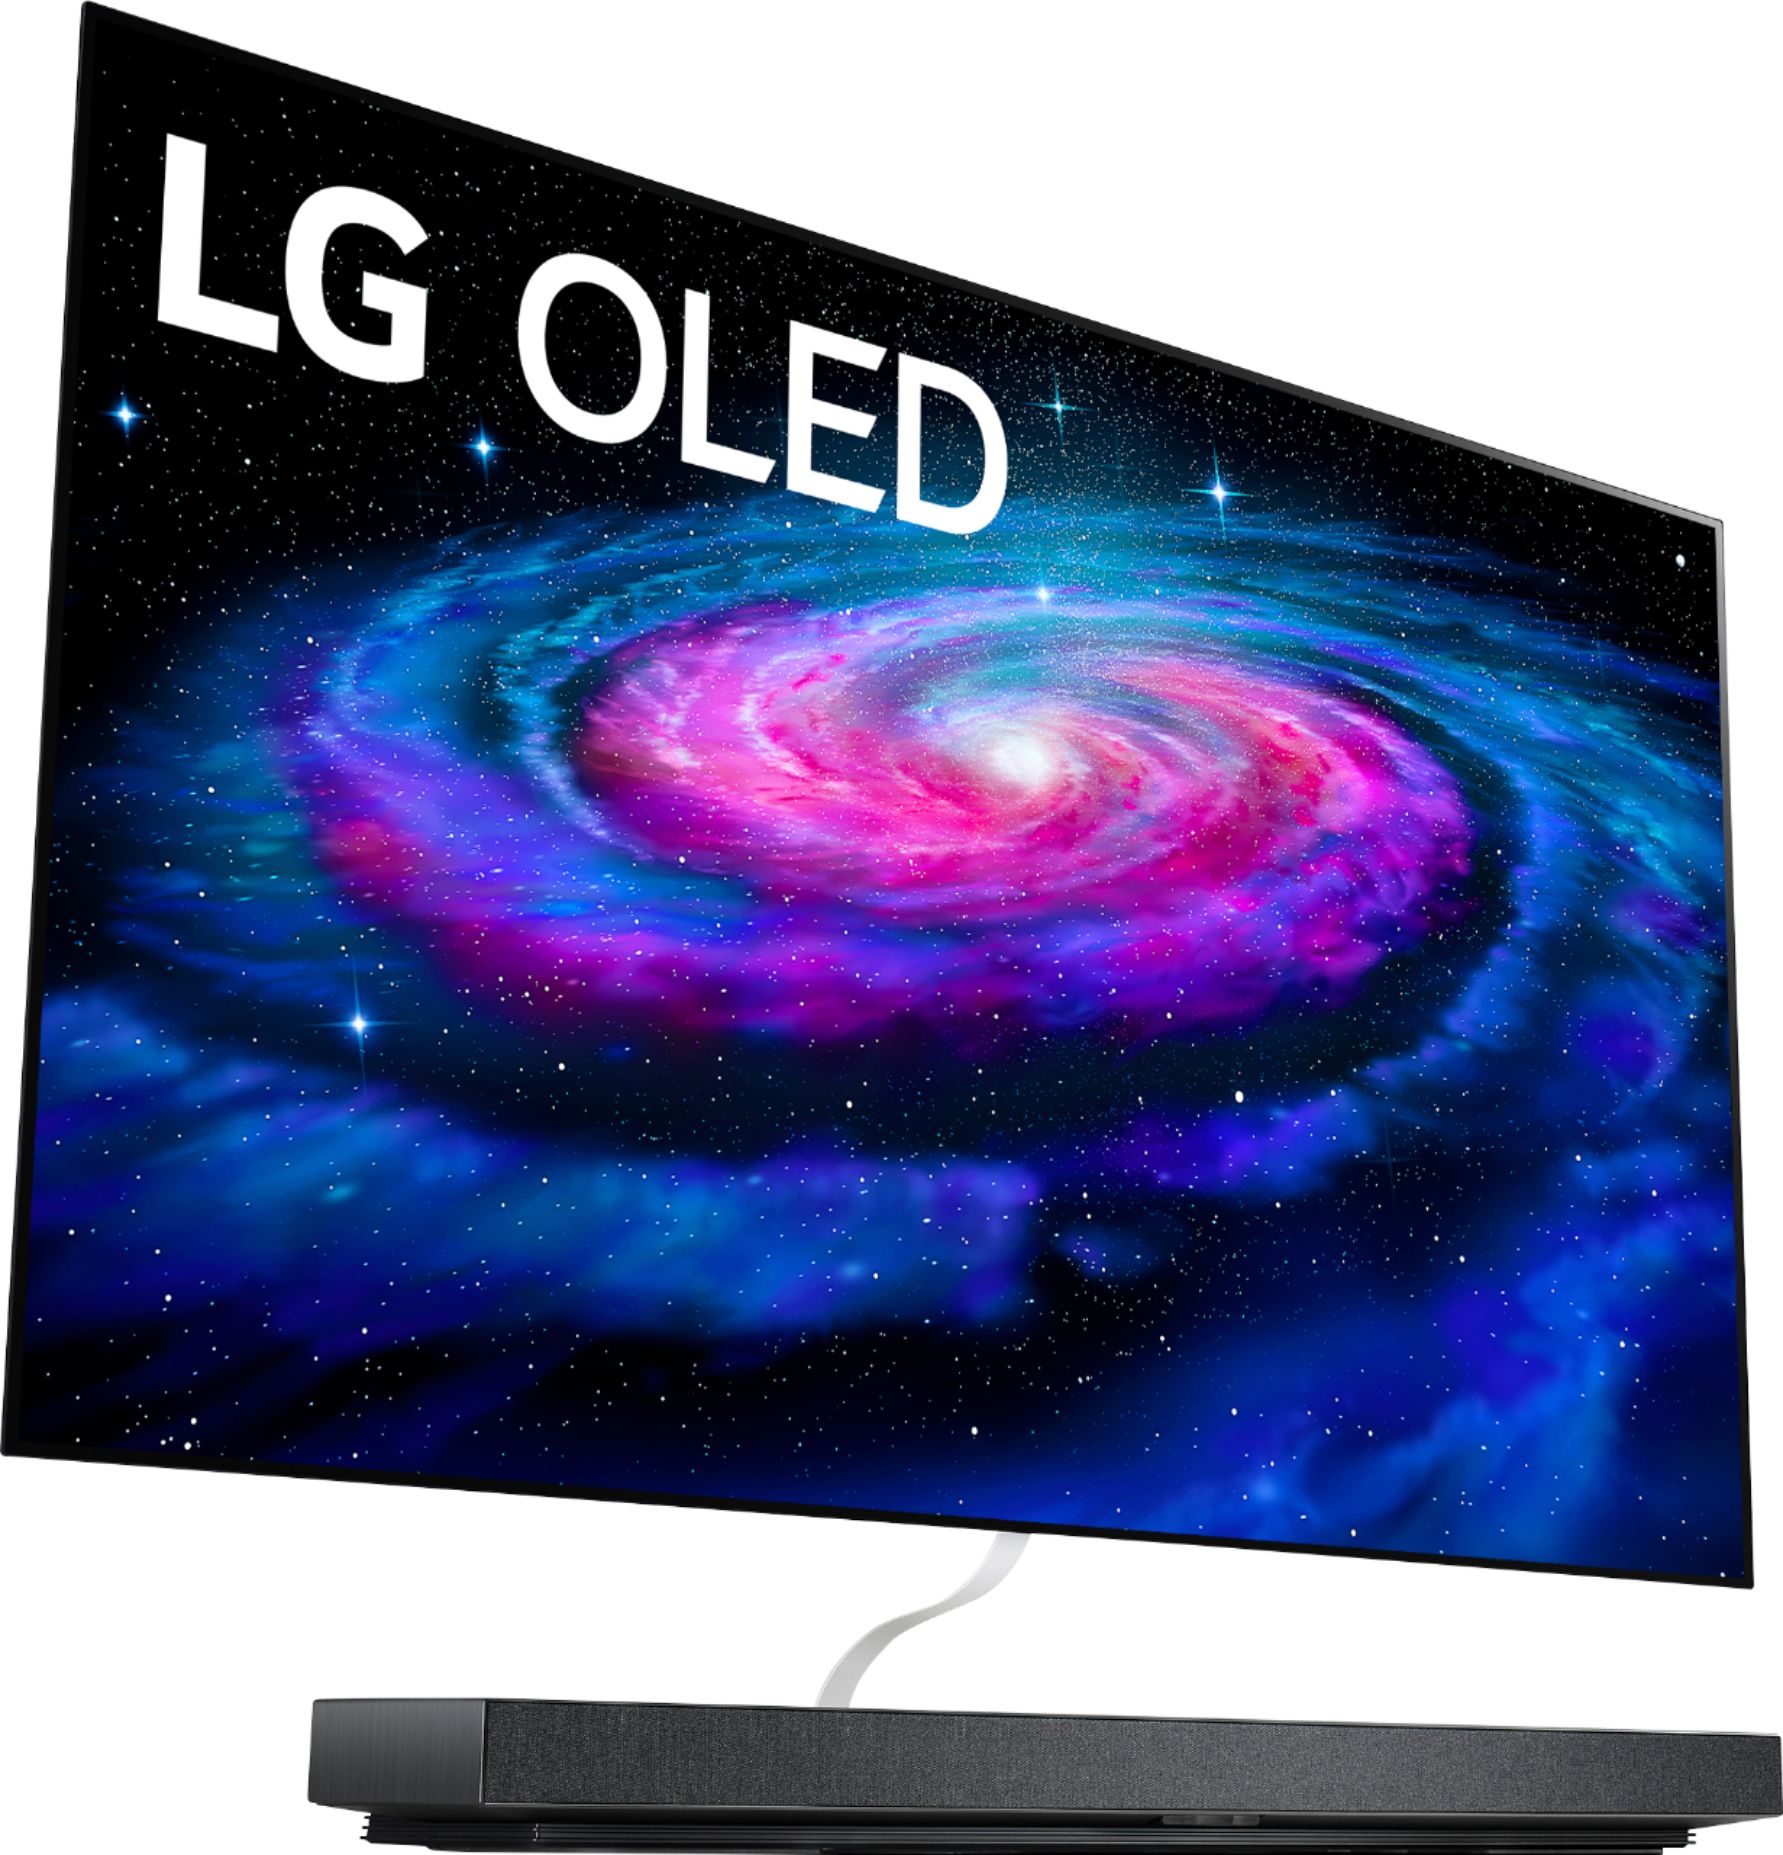 Angle View: LG - 65" Class WX Series OLED 4K UHD Smart webOS TV